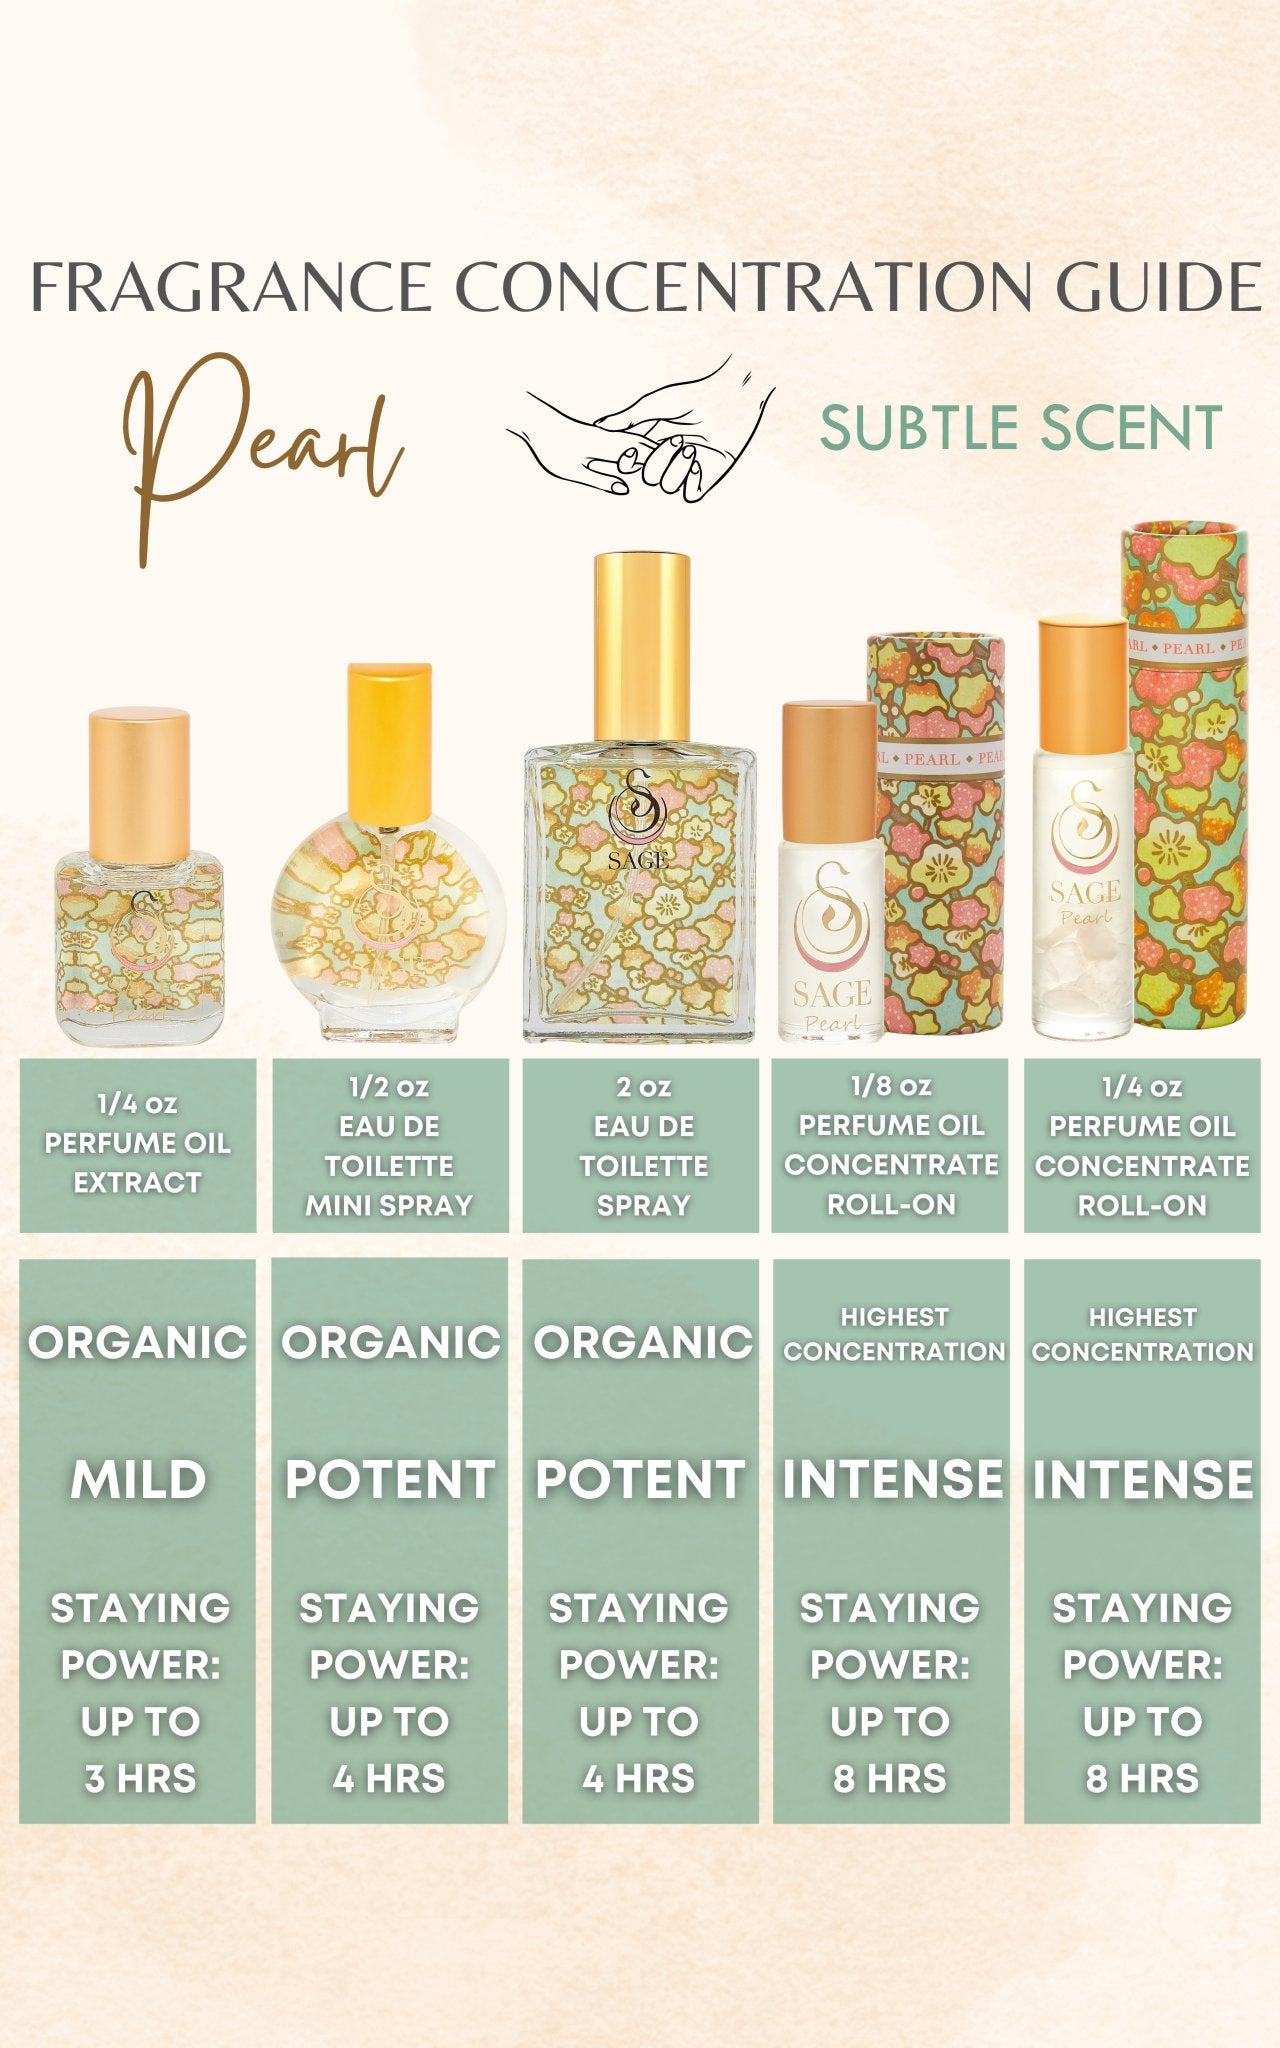 INDULGE ~ PEARL Perfume Oil Concentrate Roll-On and Organic Eau de Toilette Gift Set by Sage - The Sage Lifestyle